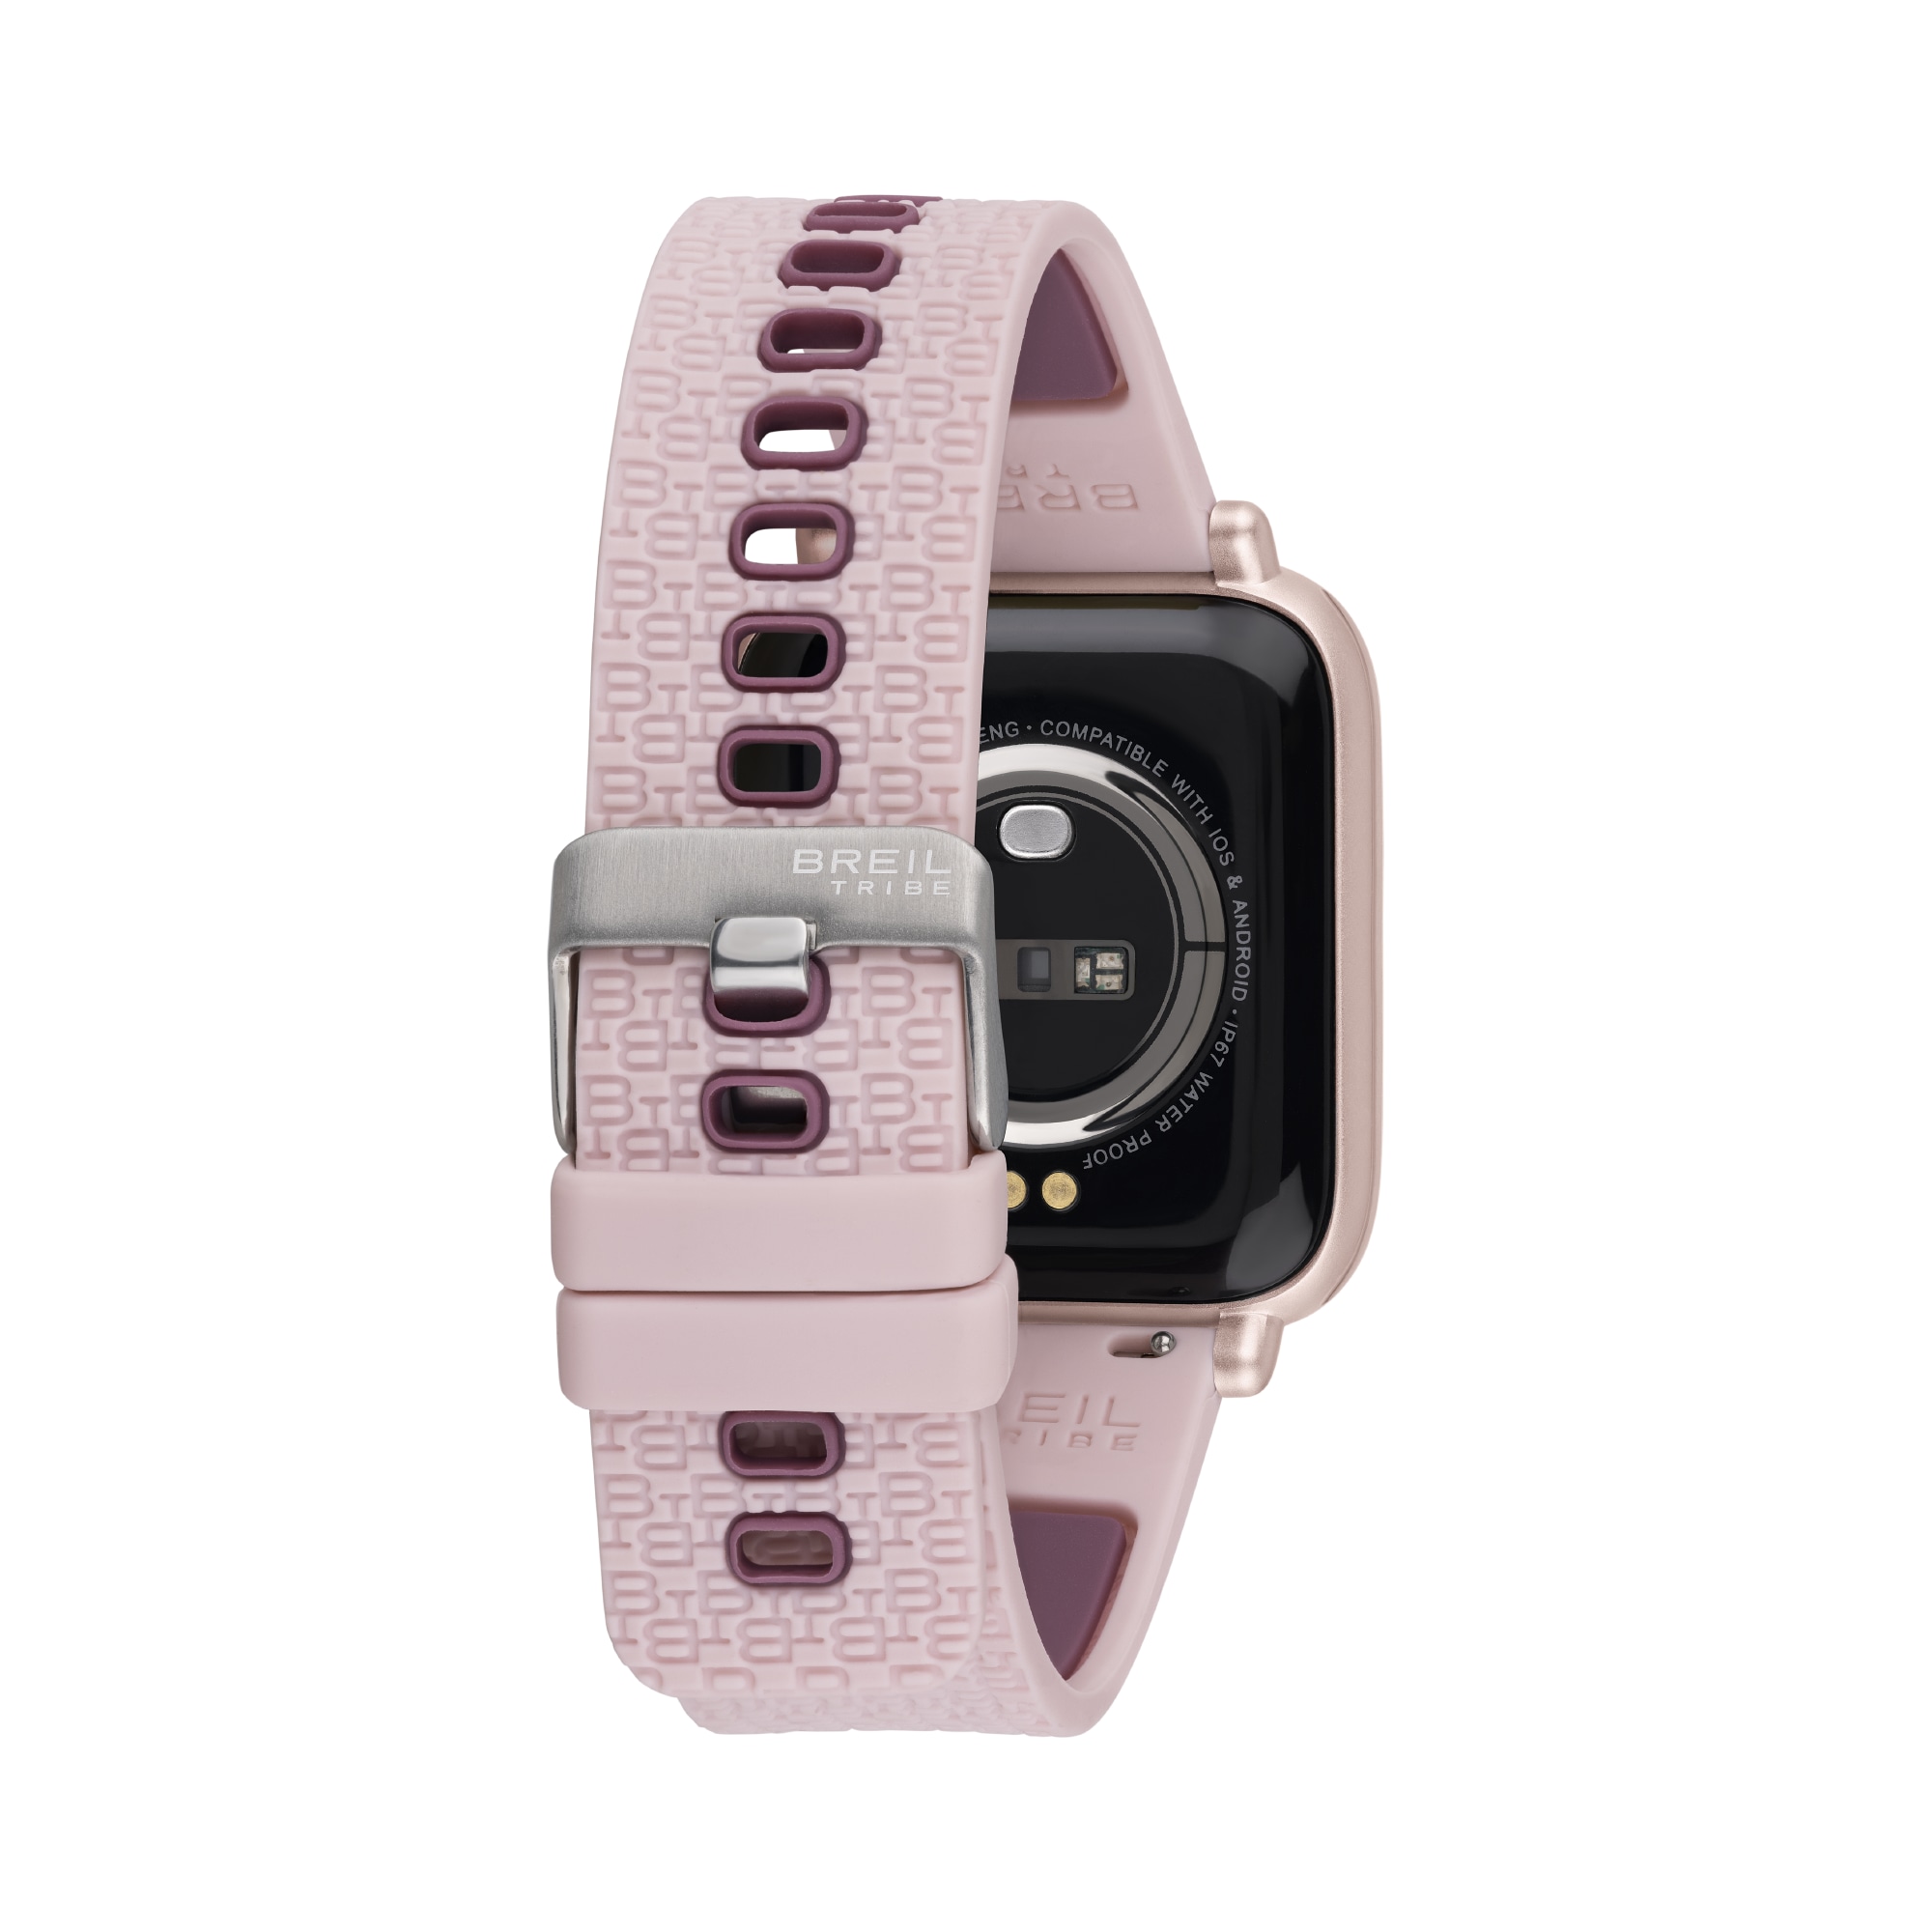 SBT-1 - SMARTWATCH WITH DOUBLE STRAP AND IP ROSE CASE - 5 - EW0603 | Breil